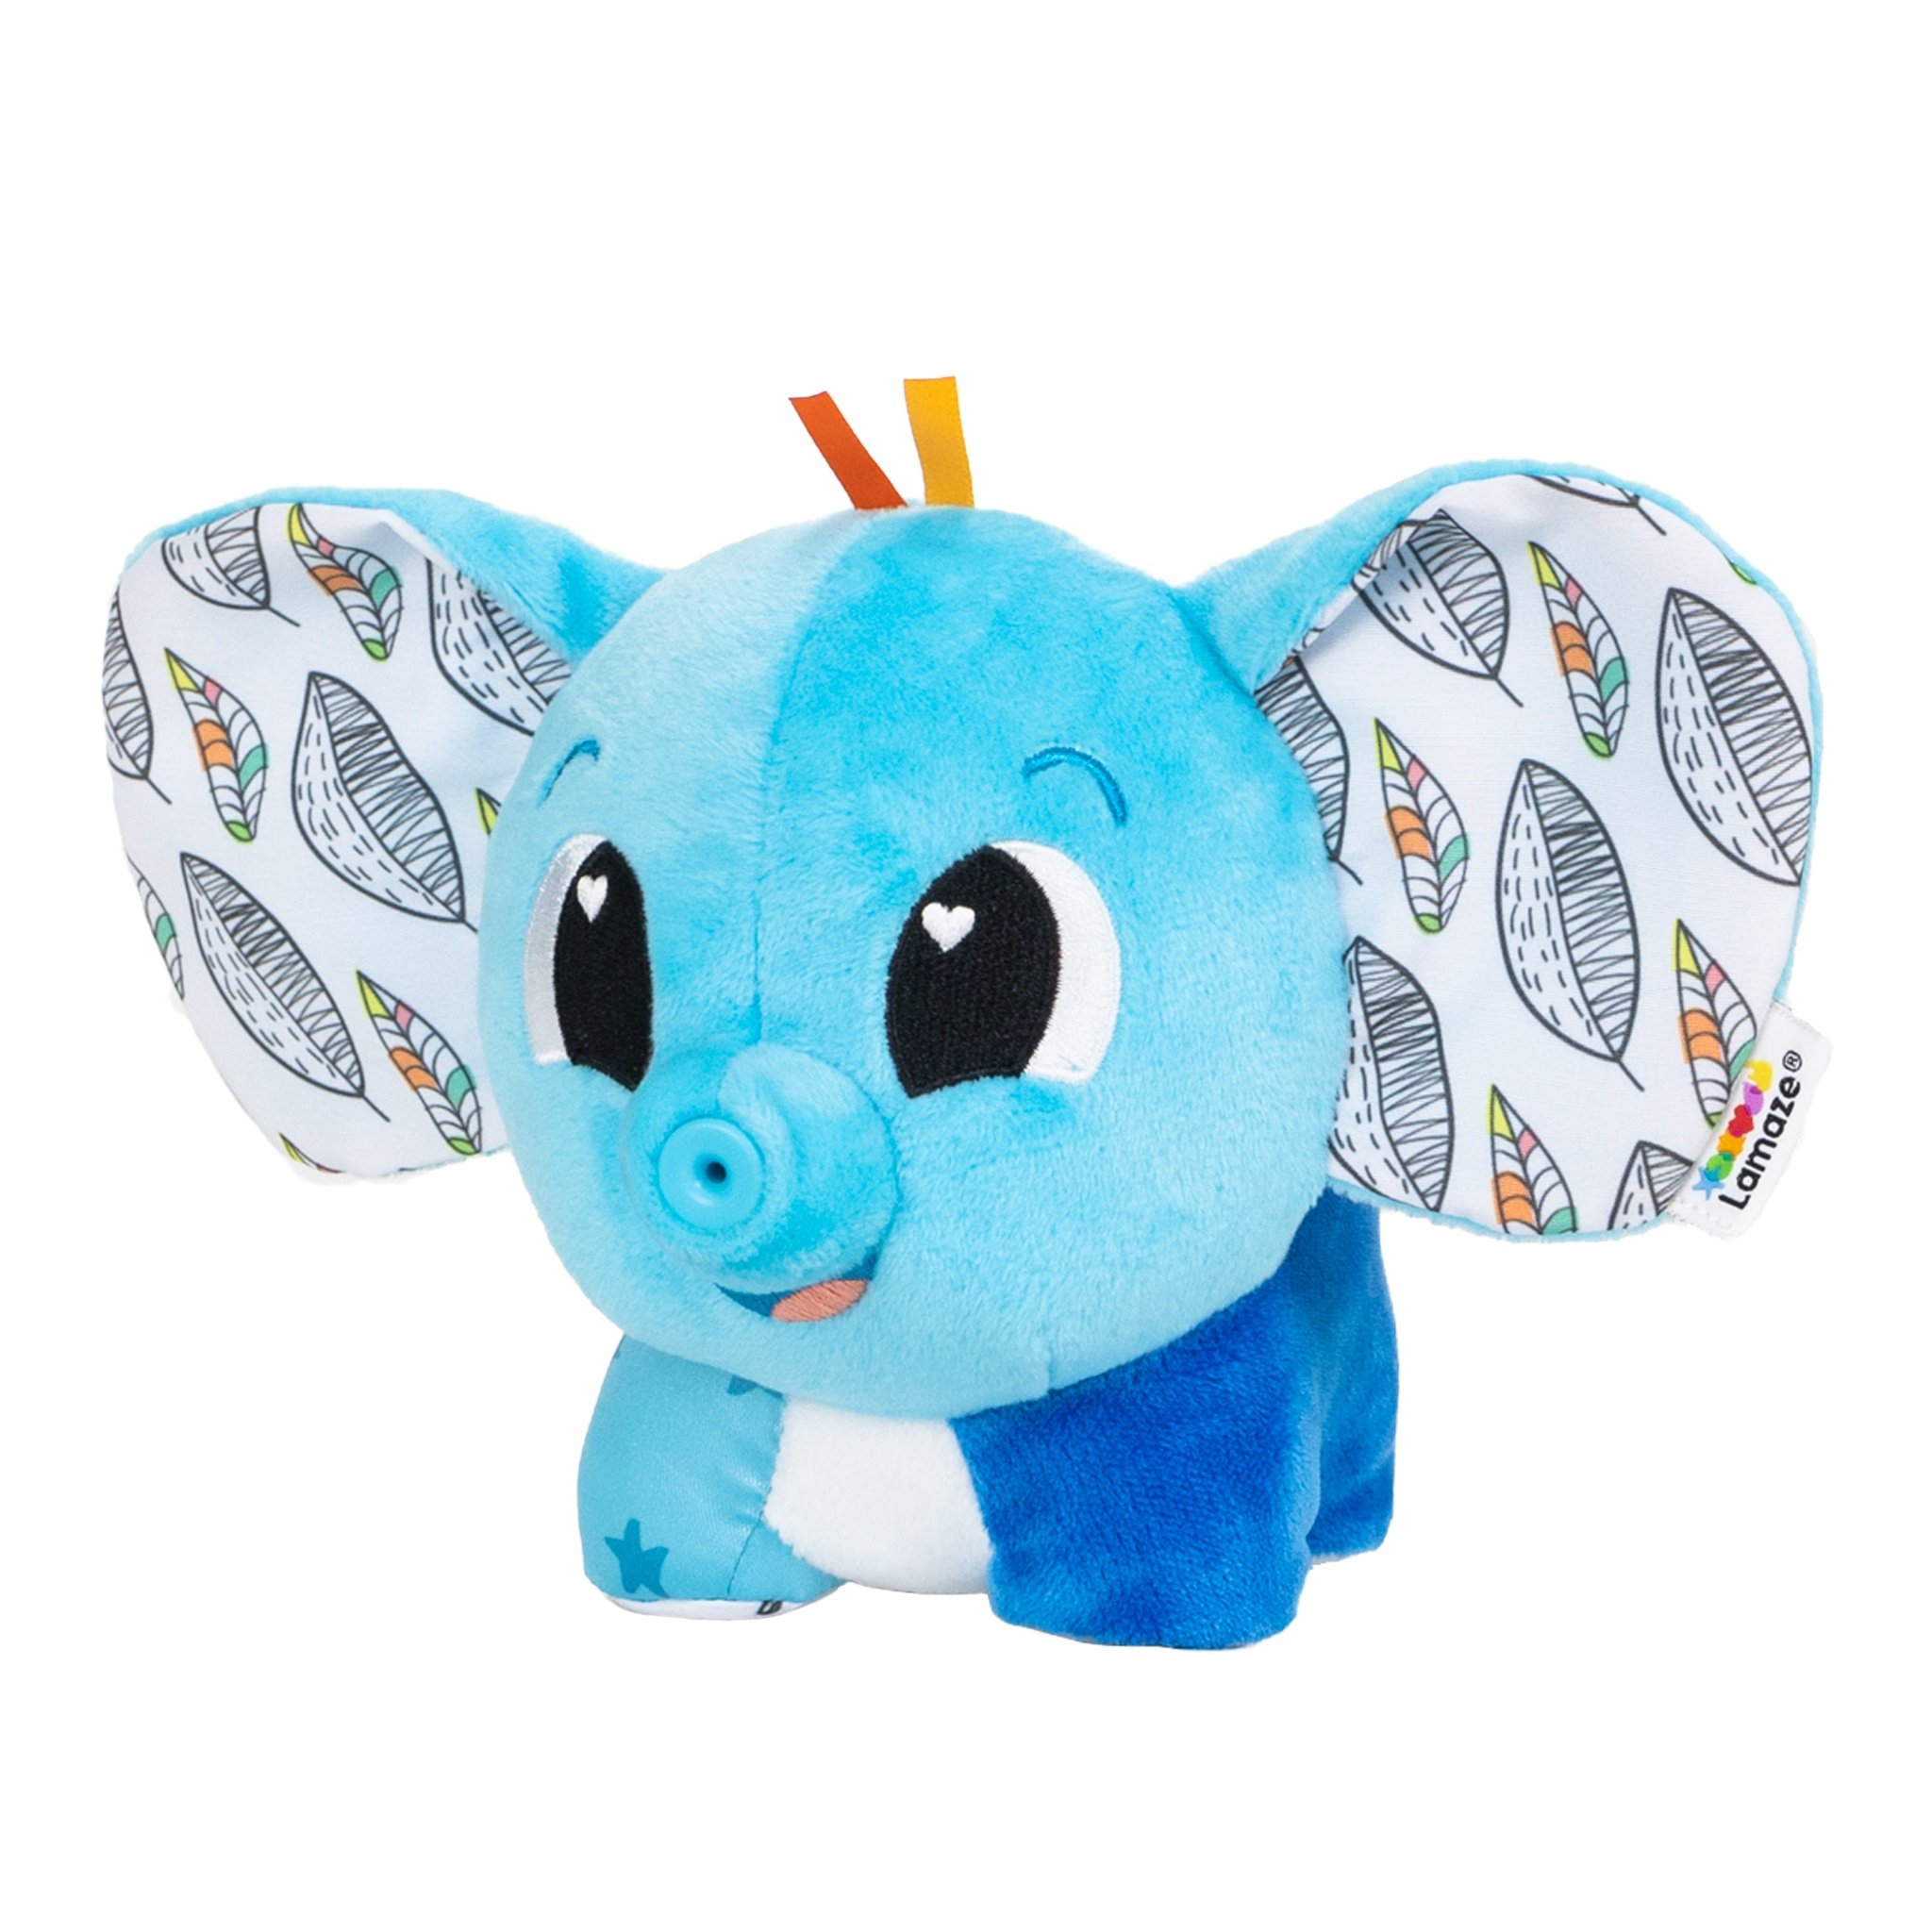 Lamaze Puffaboo Air Surprise Sensory Soothing Elephant review